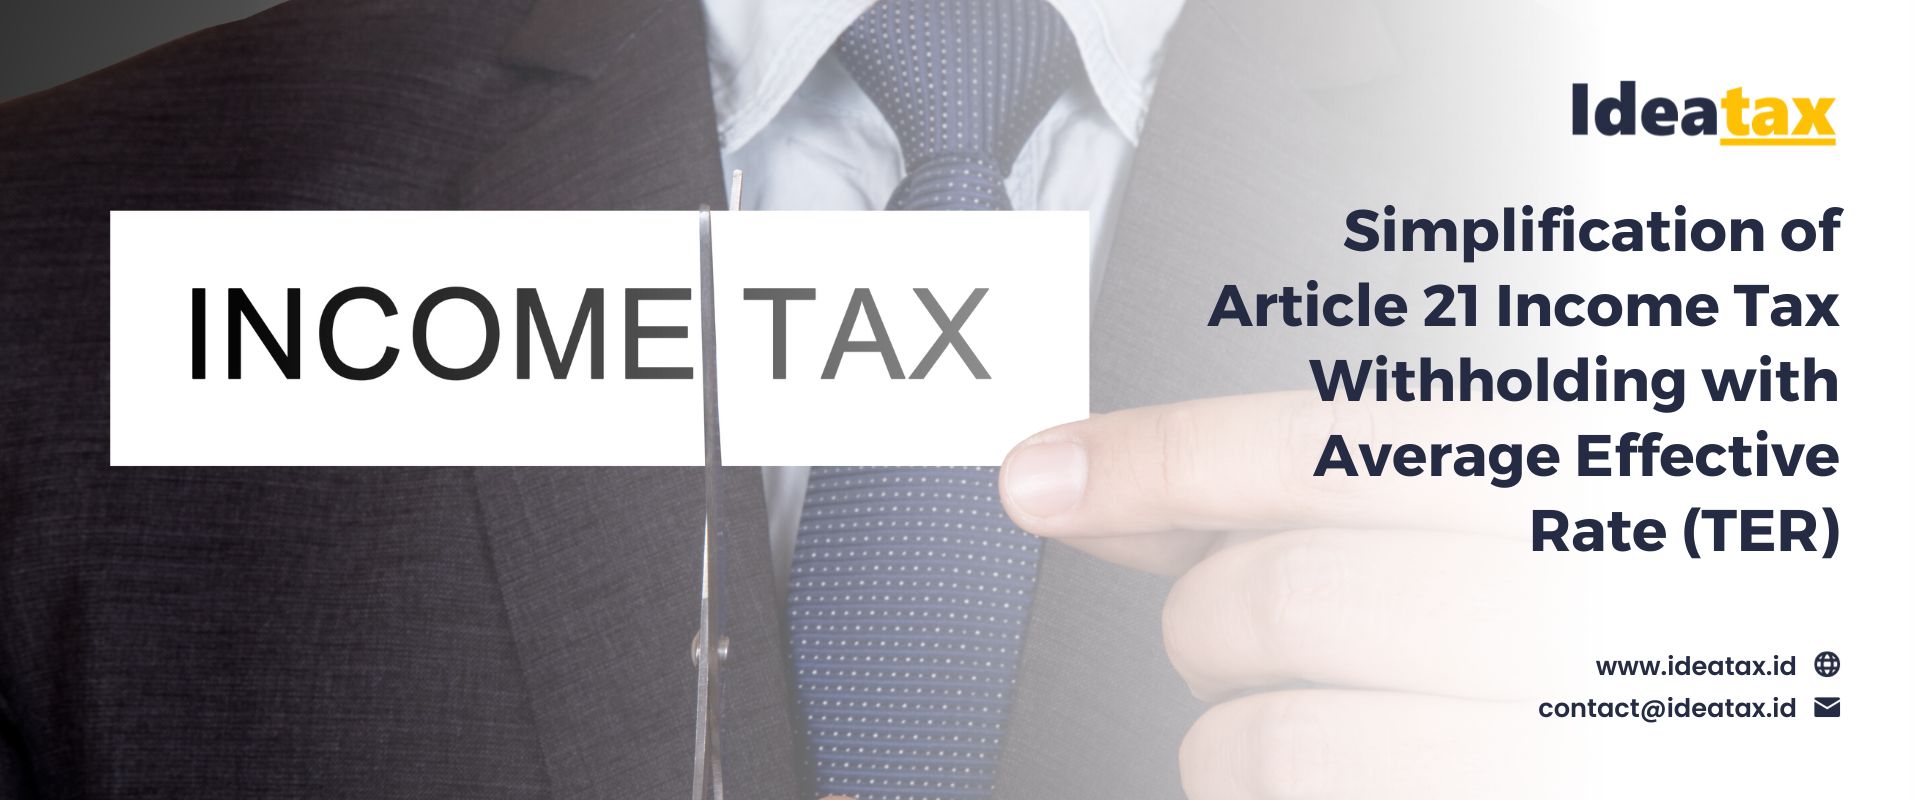 Simplification of Article 21 Income Tax Withholding with Average Effective Rate (TER)